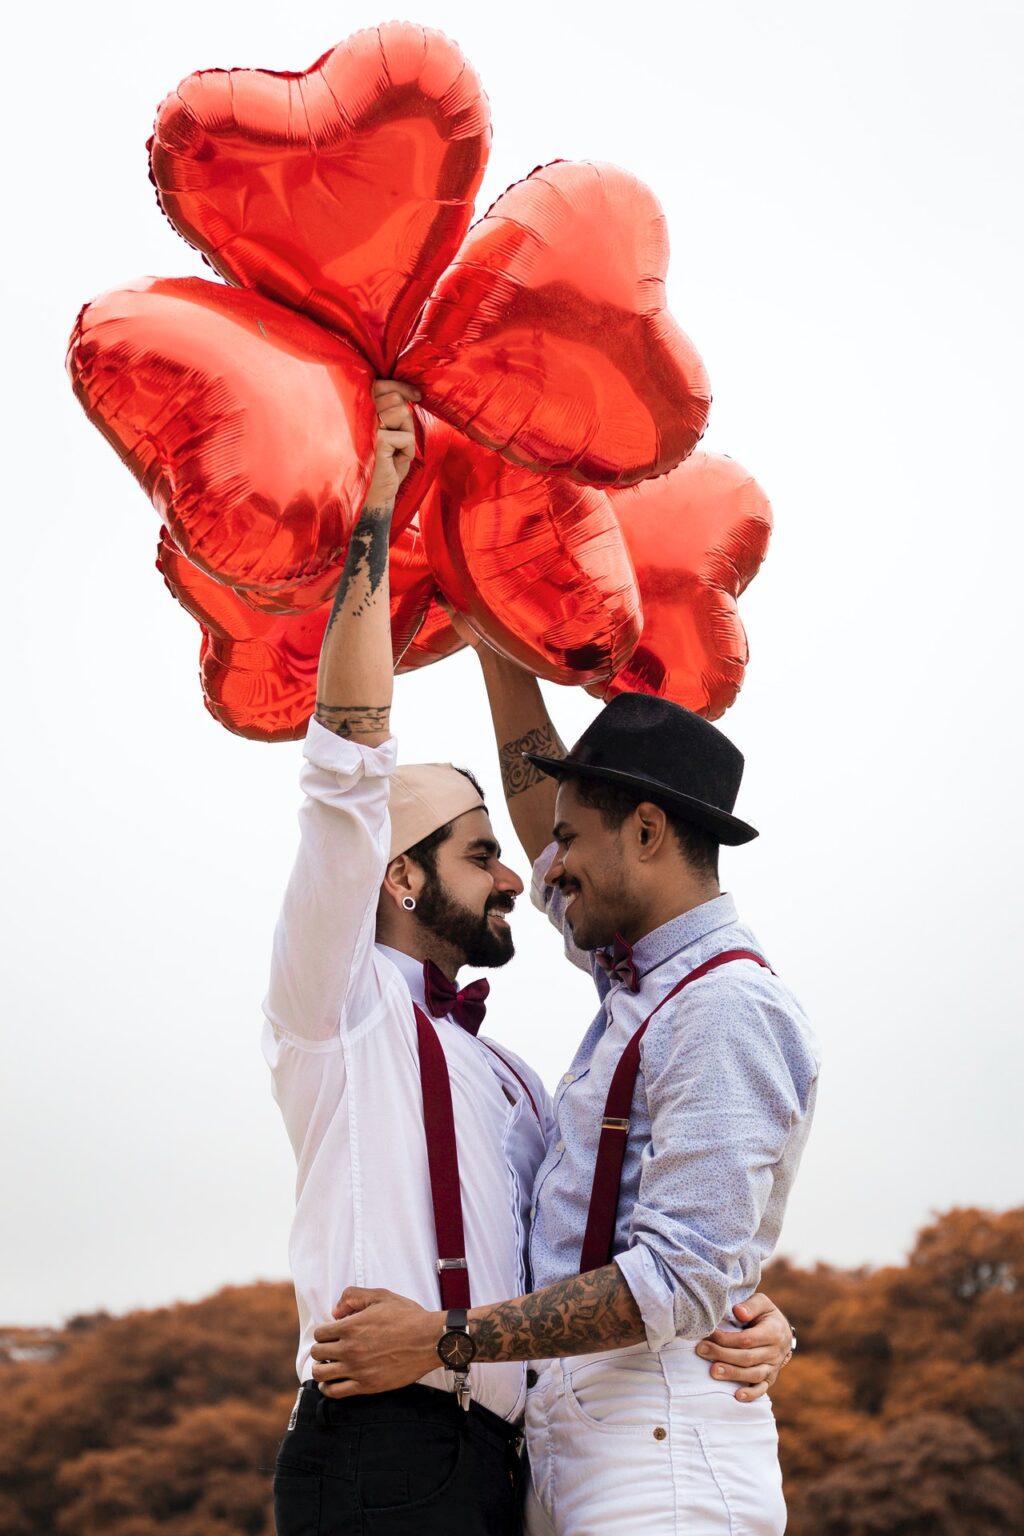 pre-wedding interview questions two men embracing while holding heart balloons-1756632/